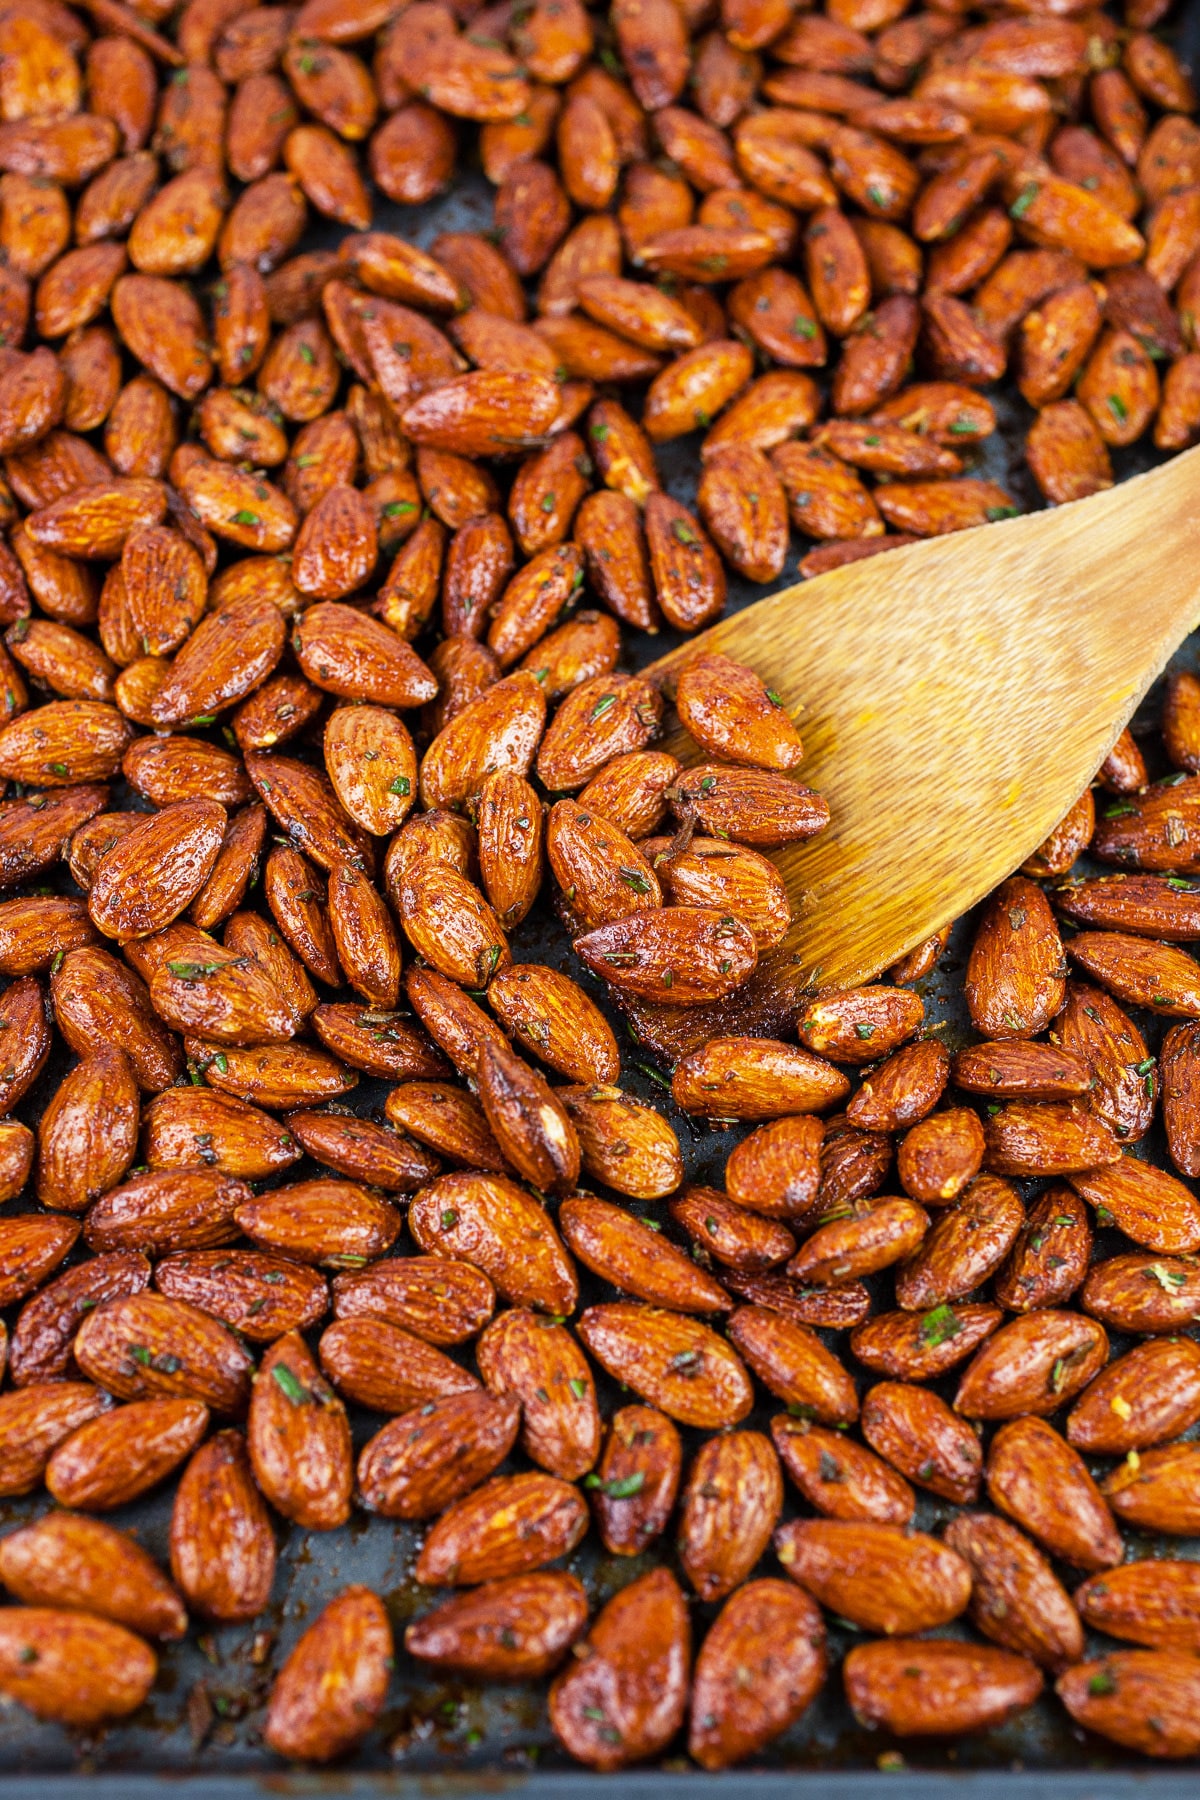 Raw almonds with olive oil and spices on baking sheet.